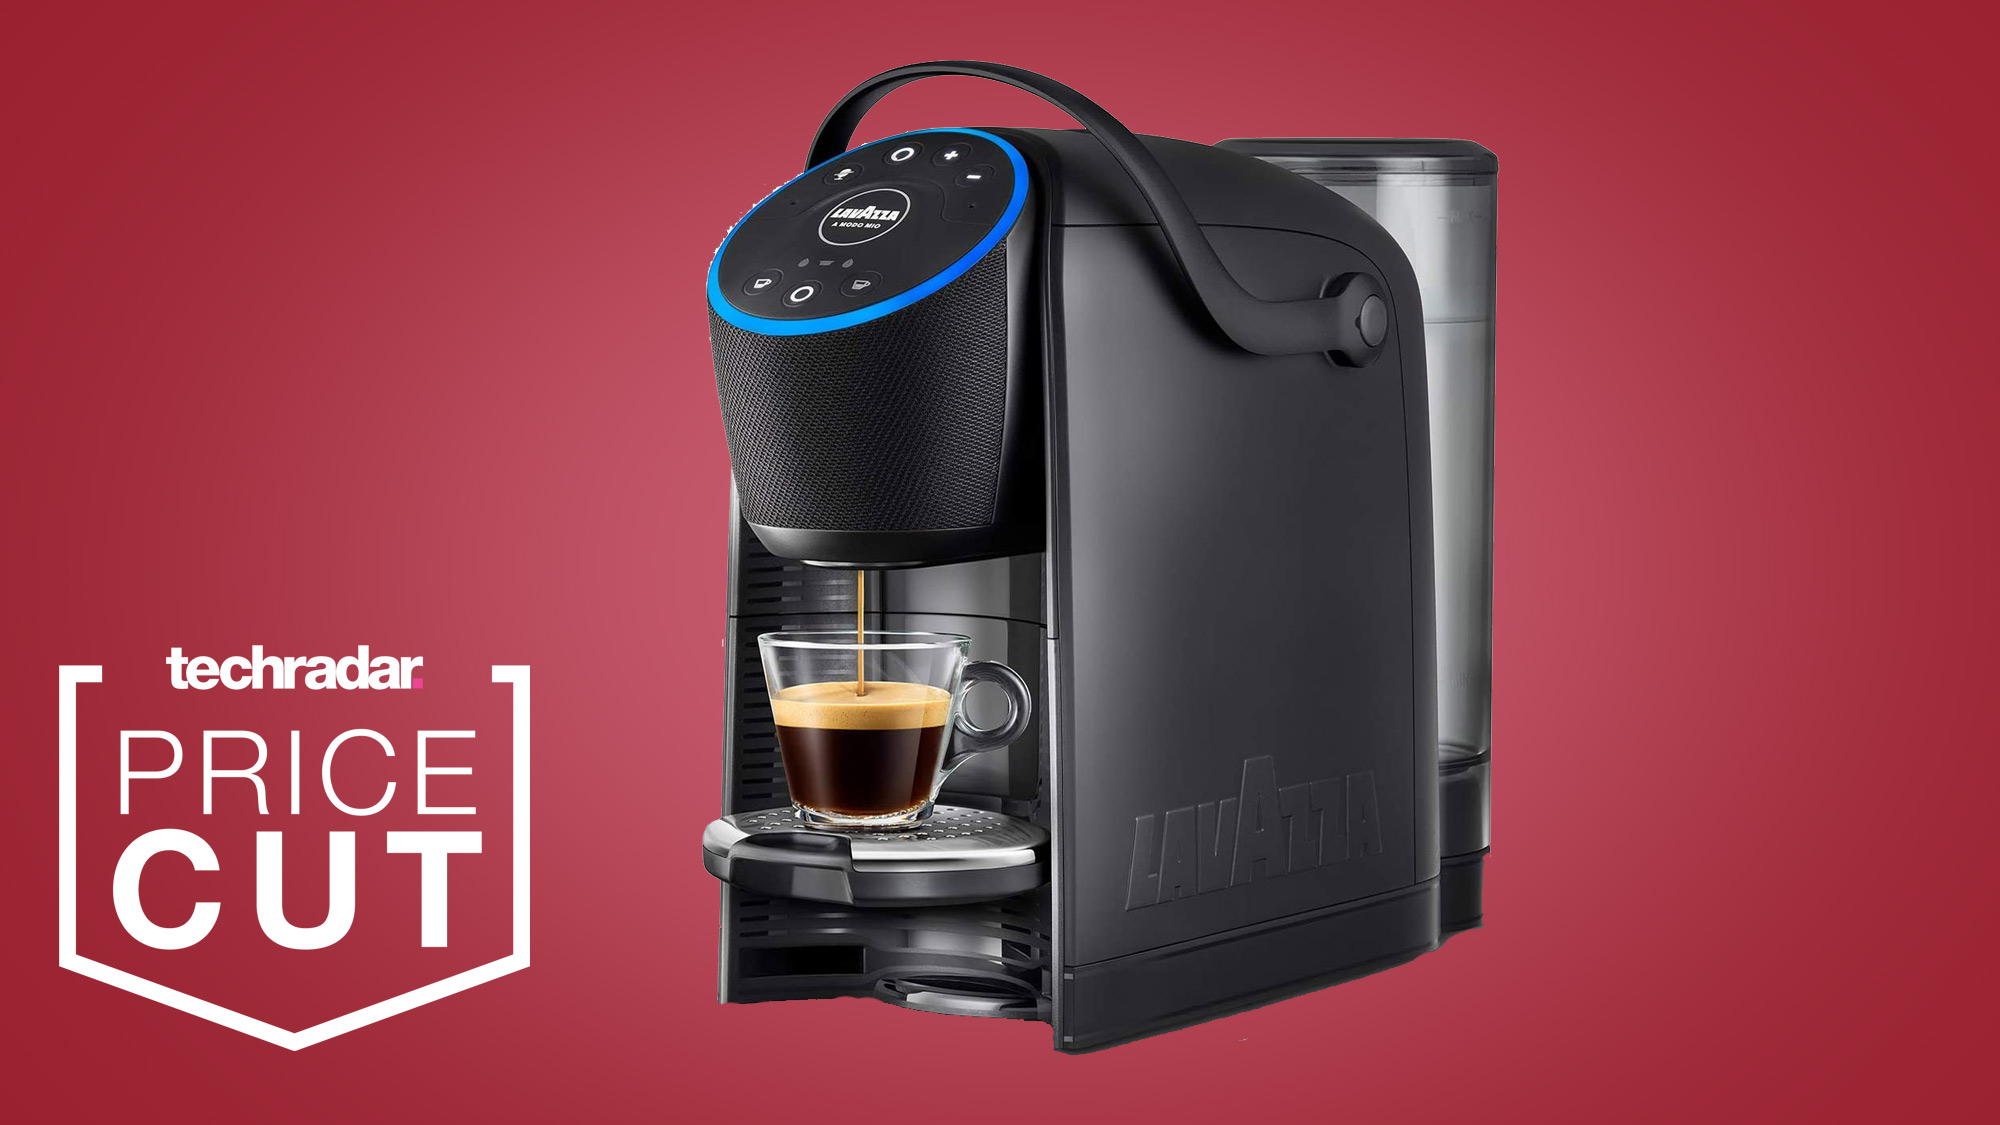 You can get almost 20% off this Alexa-enabled coffee maker right